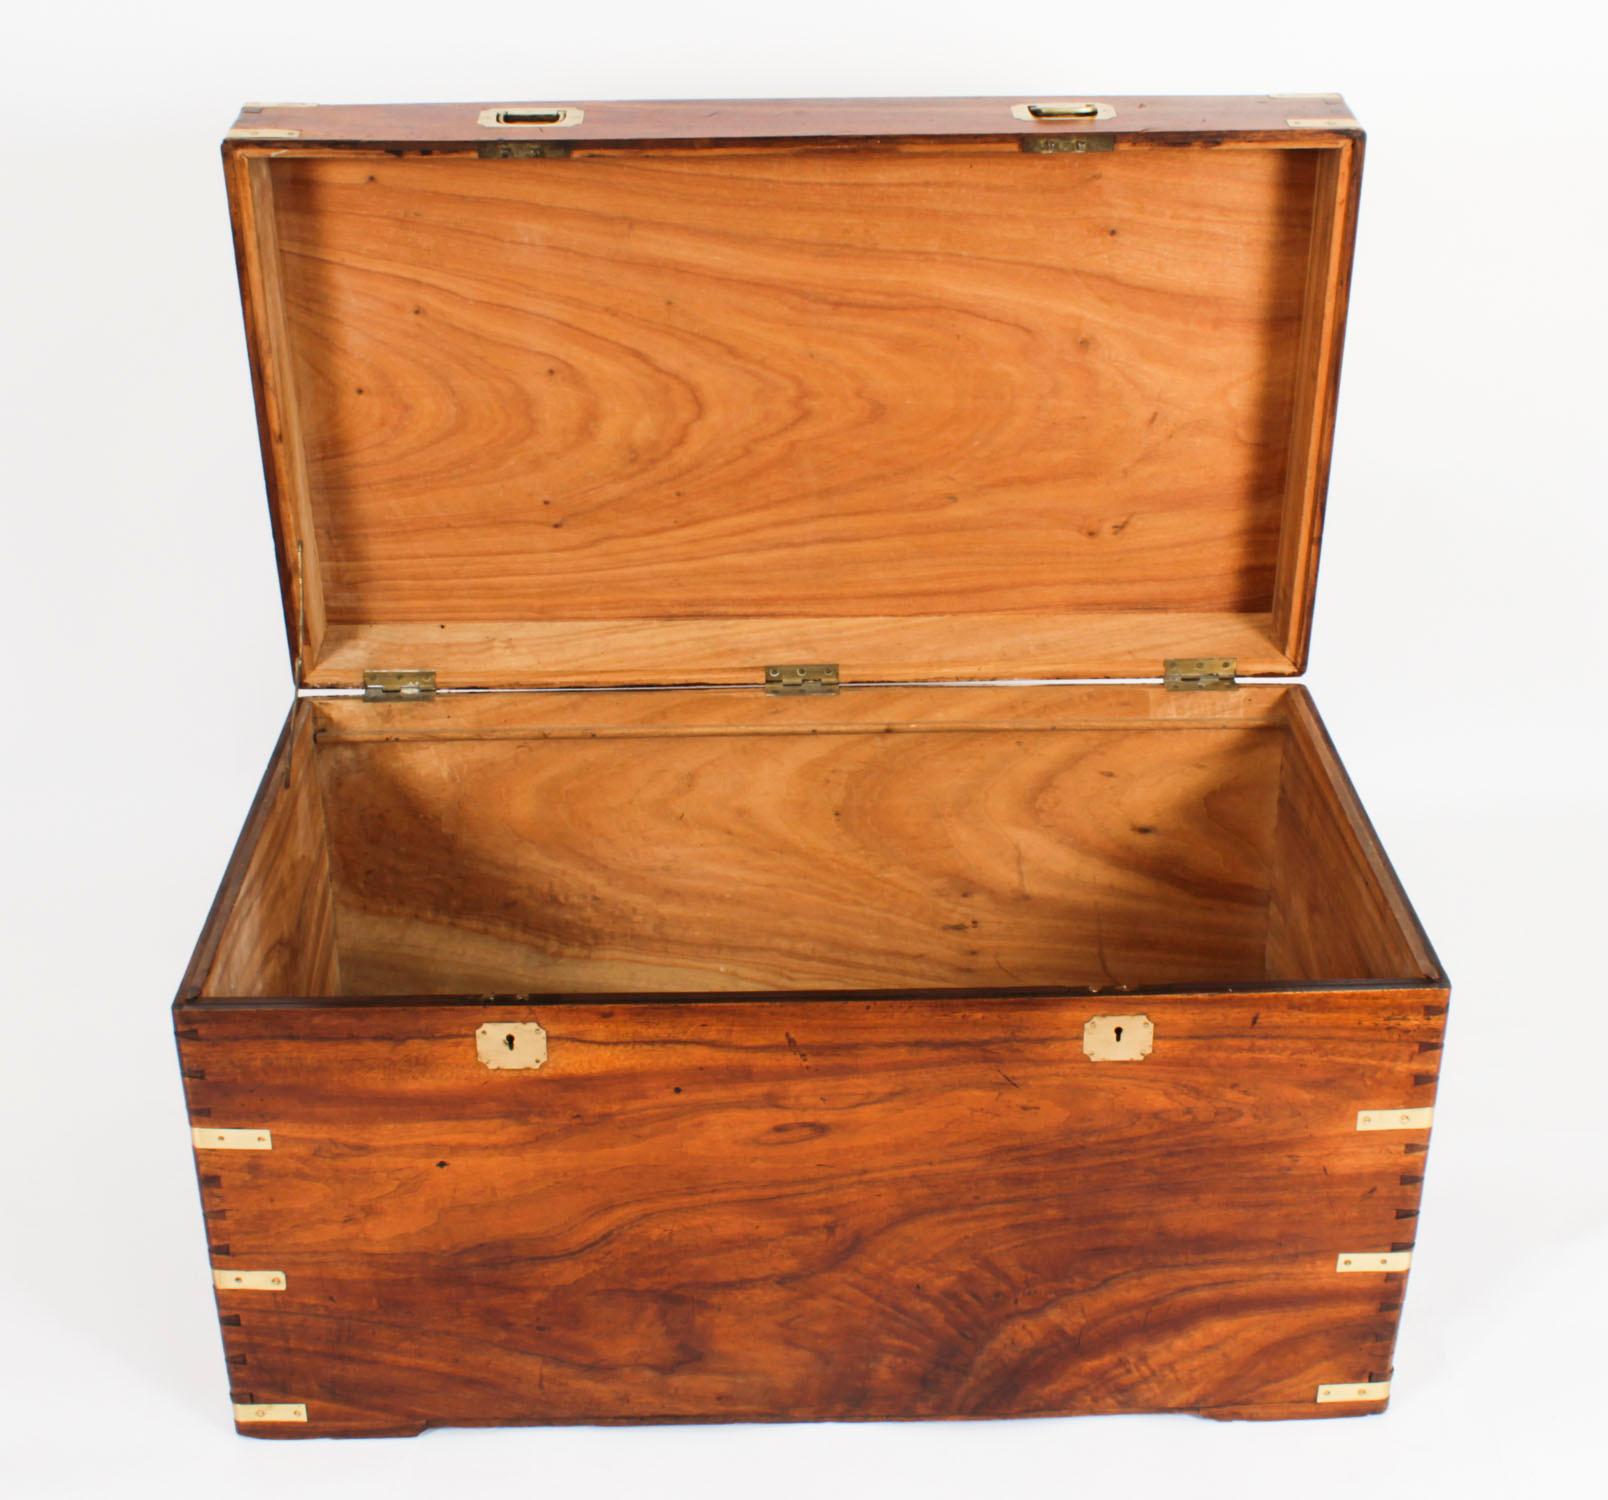 This is beautifully crafted antique Victorian camphorwood military trunk or coffer, circa 1860 in date.

With a rectangular hinged lid and side carrying handles there is no mistaking its unique design and superb quality, which is certain to attract